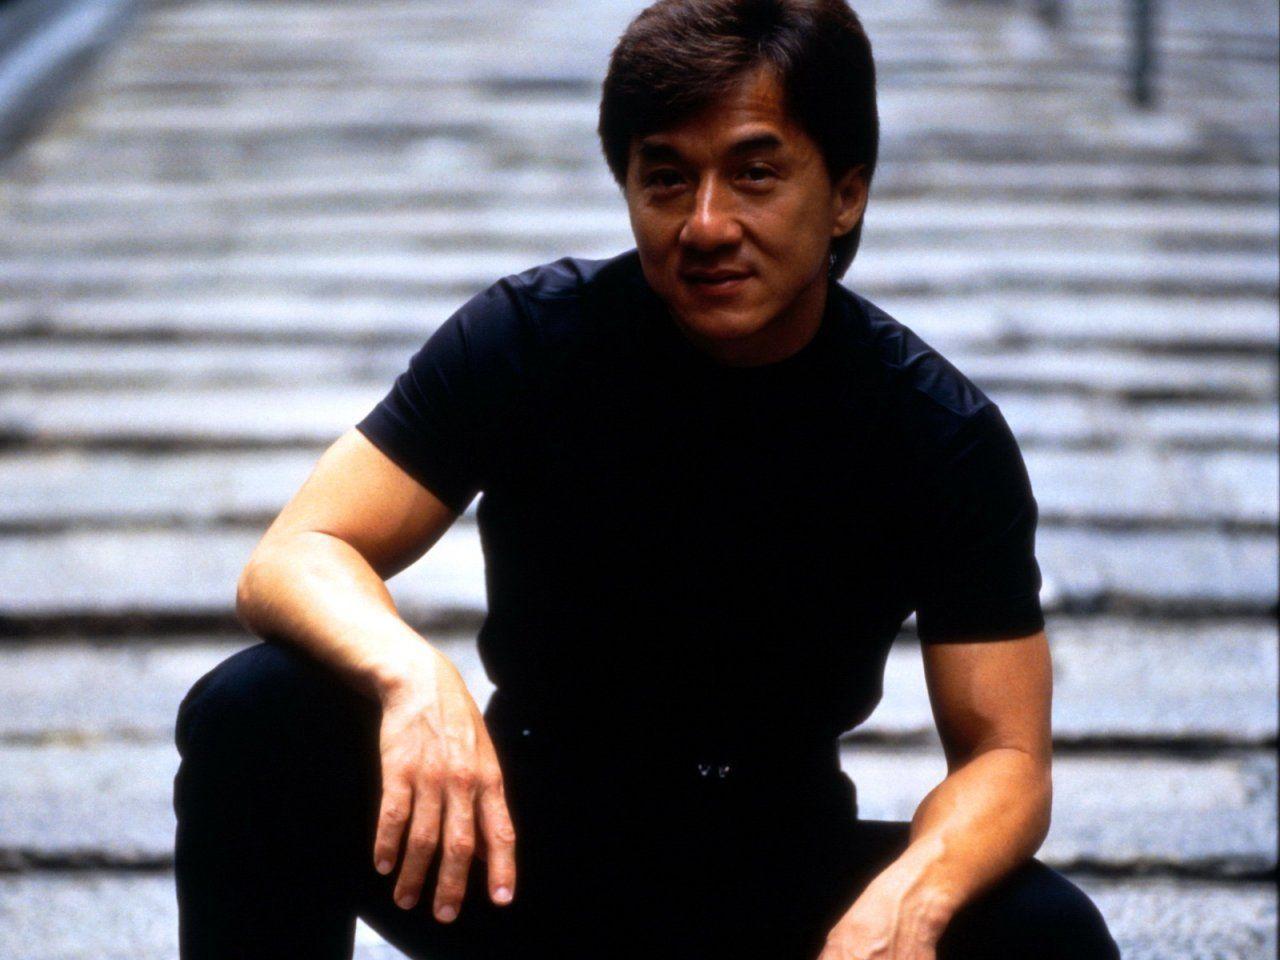 jackie chan awesome picture, china hero jackie chan, jackie chan HD